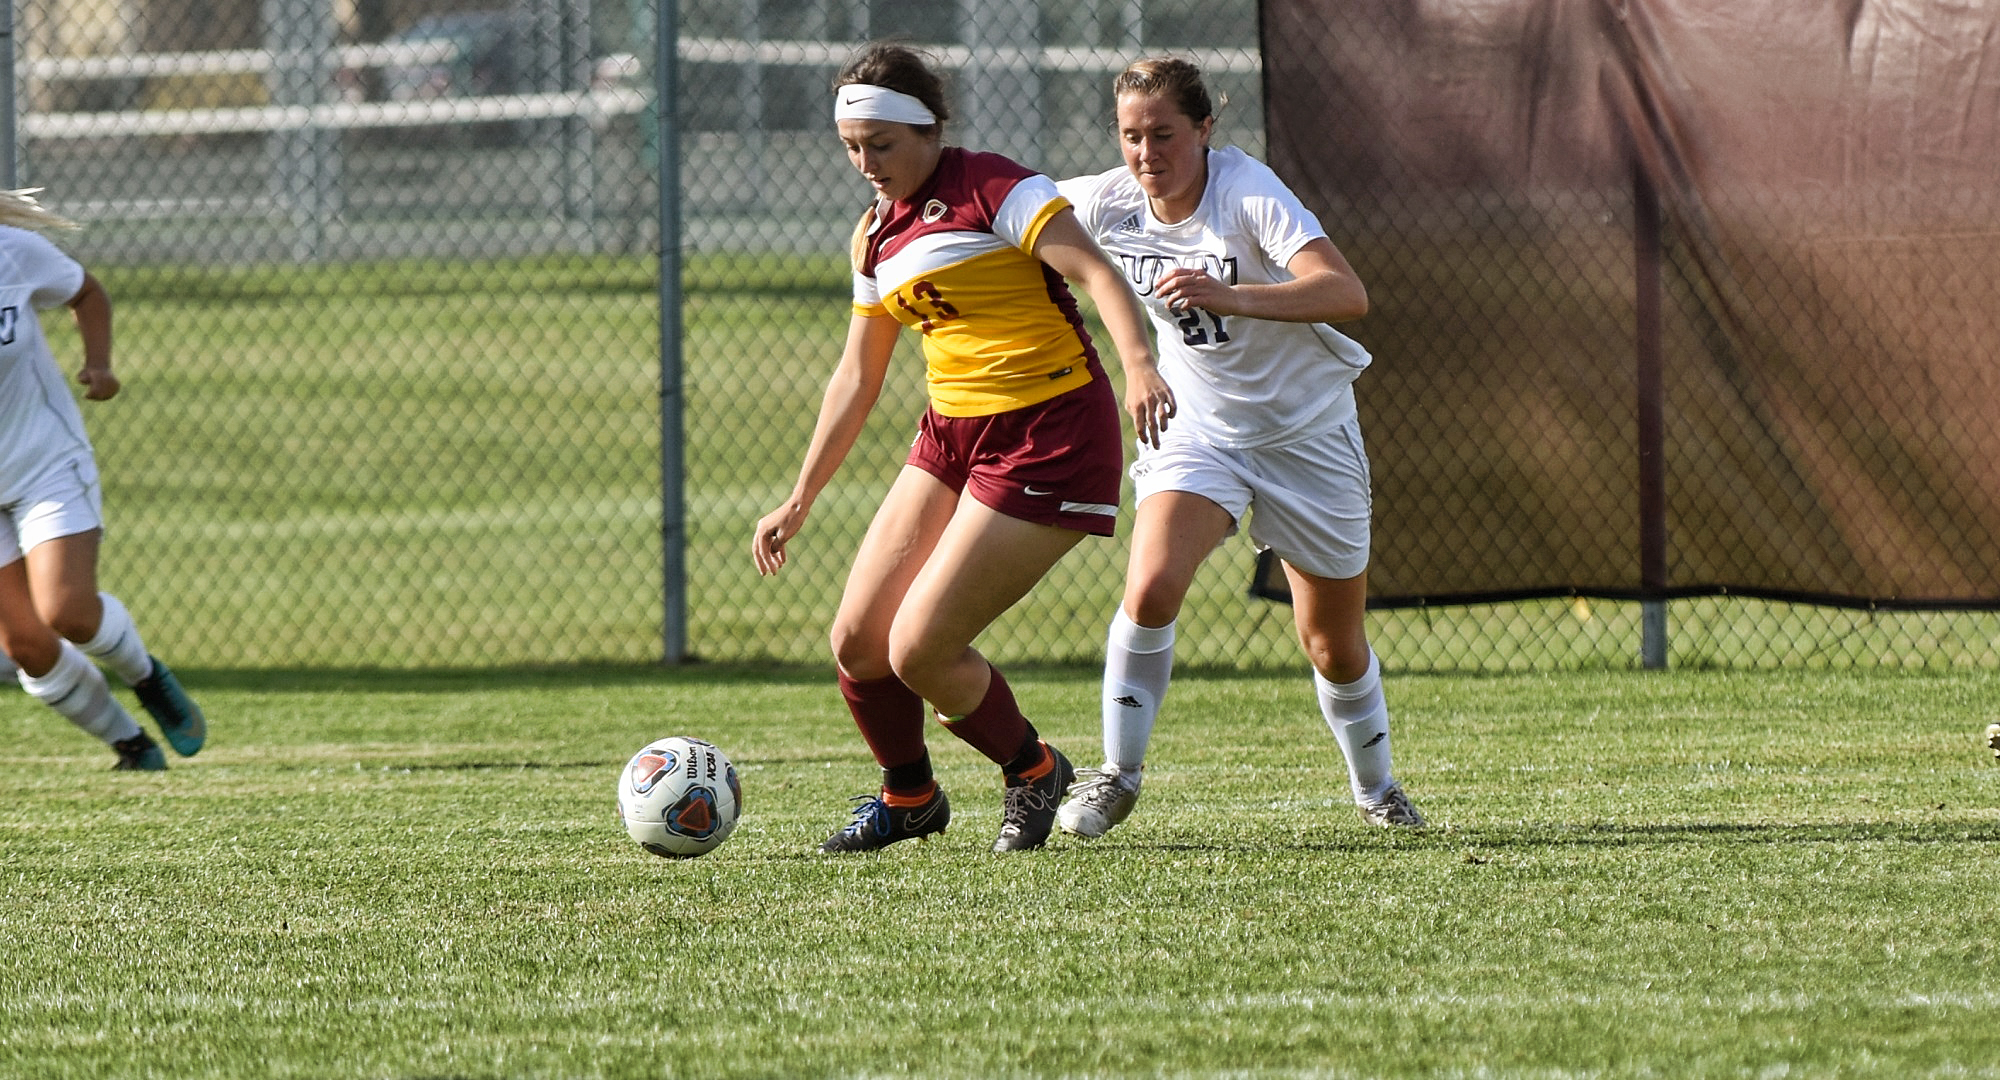 Kalli Baarstad had one of the two Cobber shots on goal in their MIAC opener against St. Benedict.